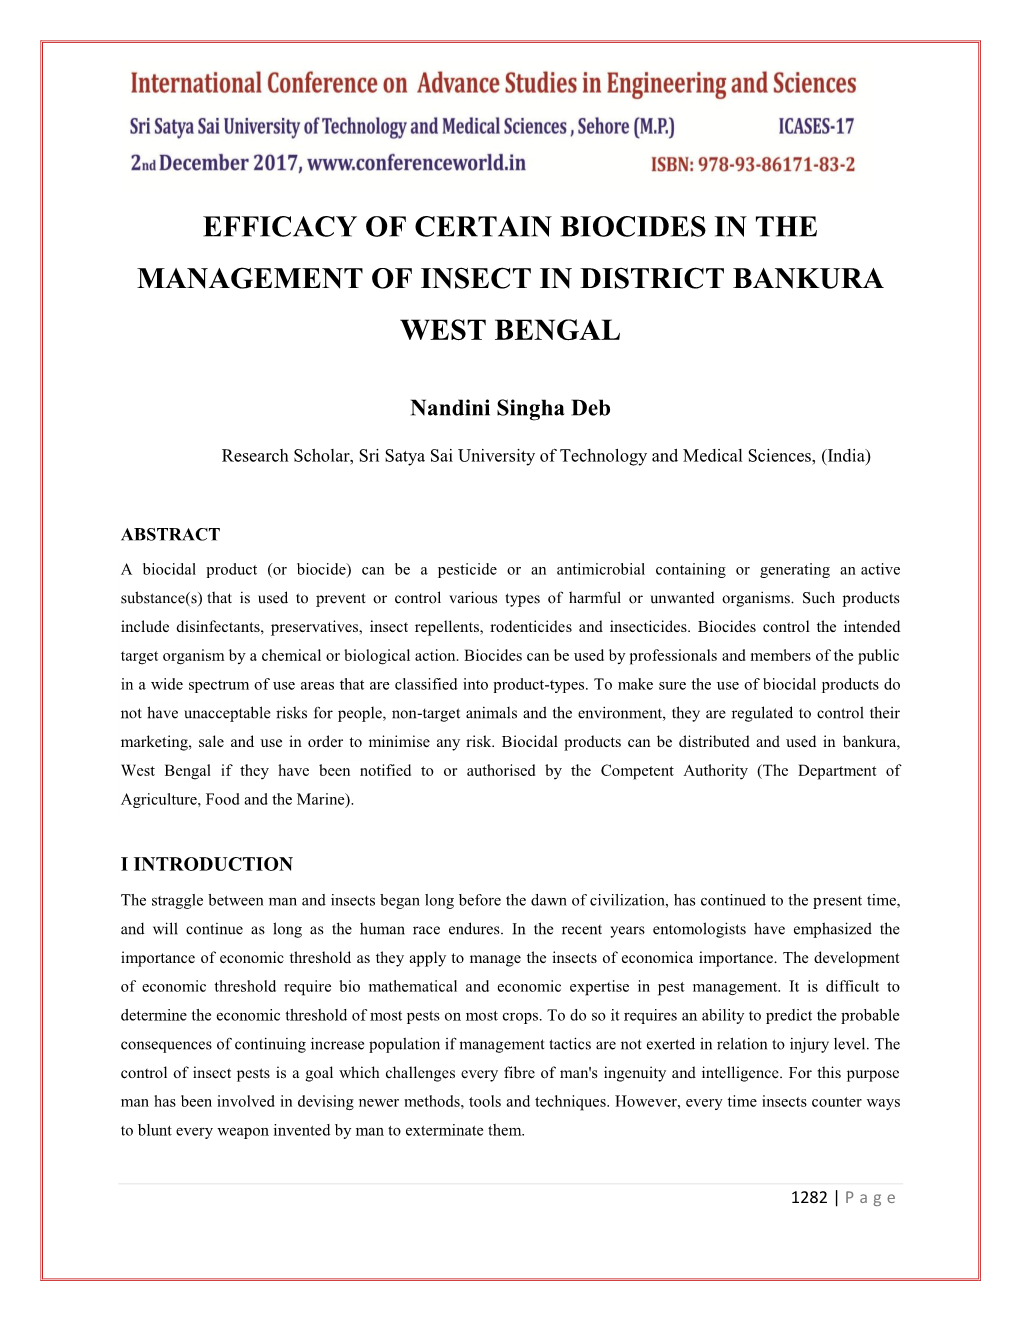 Efficacy of Certain Biocides in the Management of Insect in District Bankura West Bengal